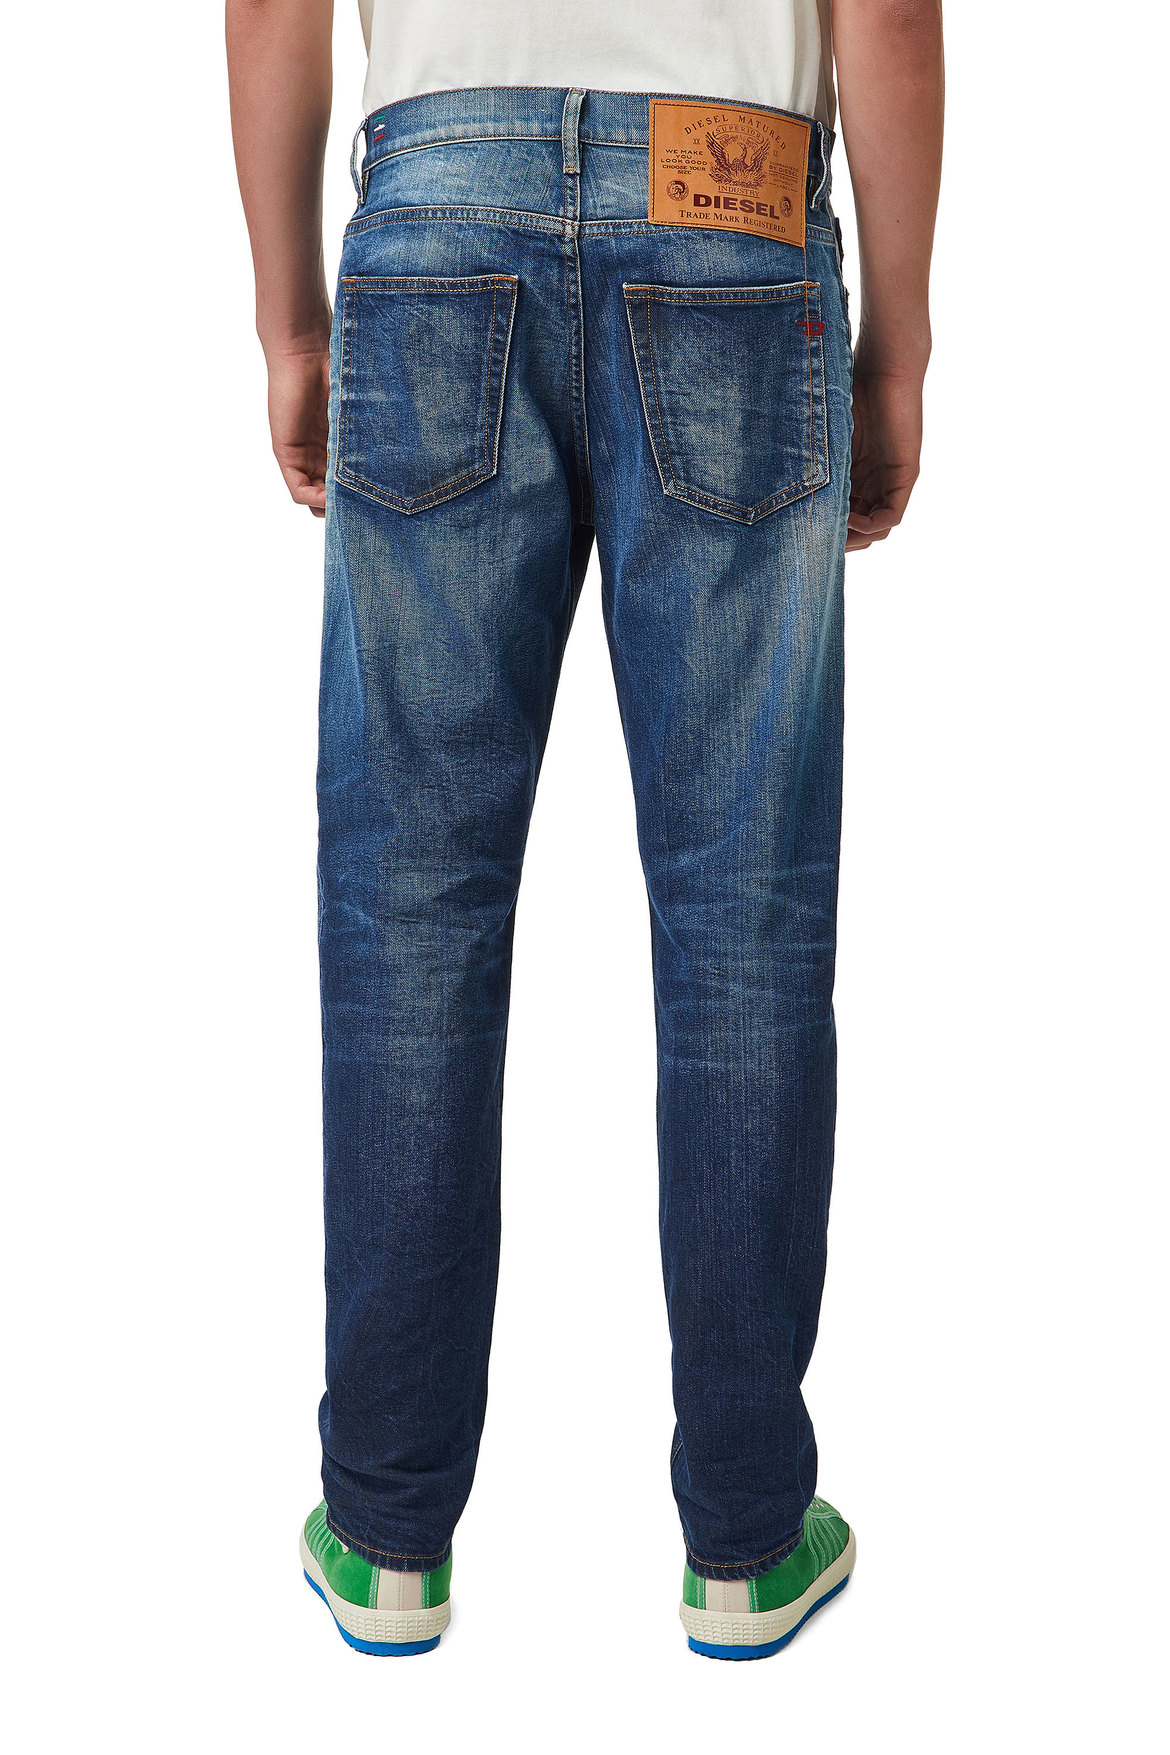 Tapered - 2005 D-Fining | Diesel